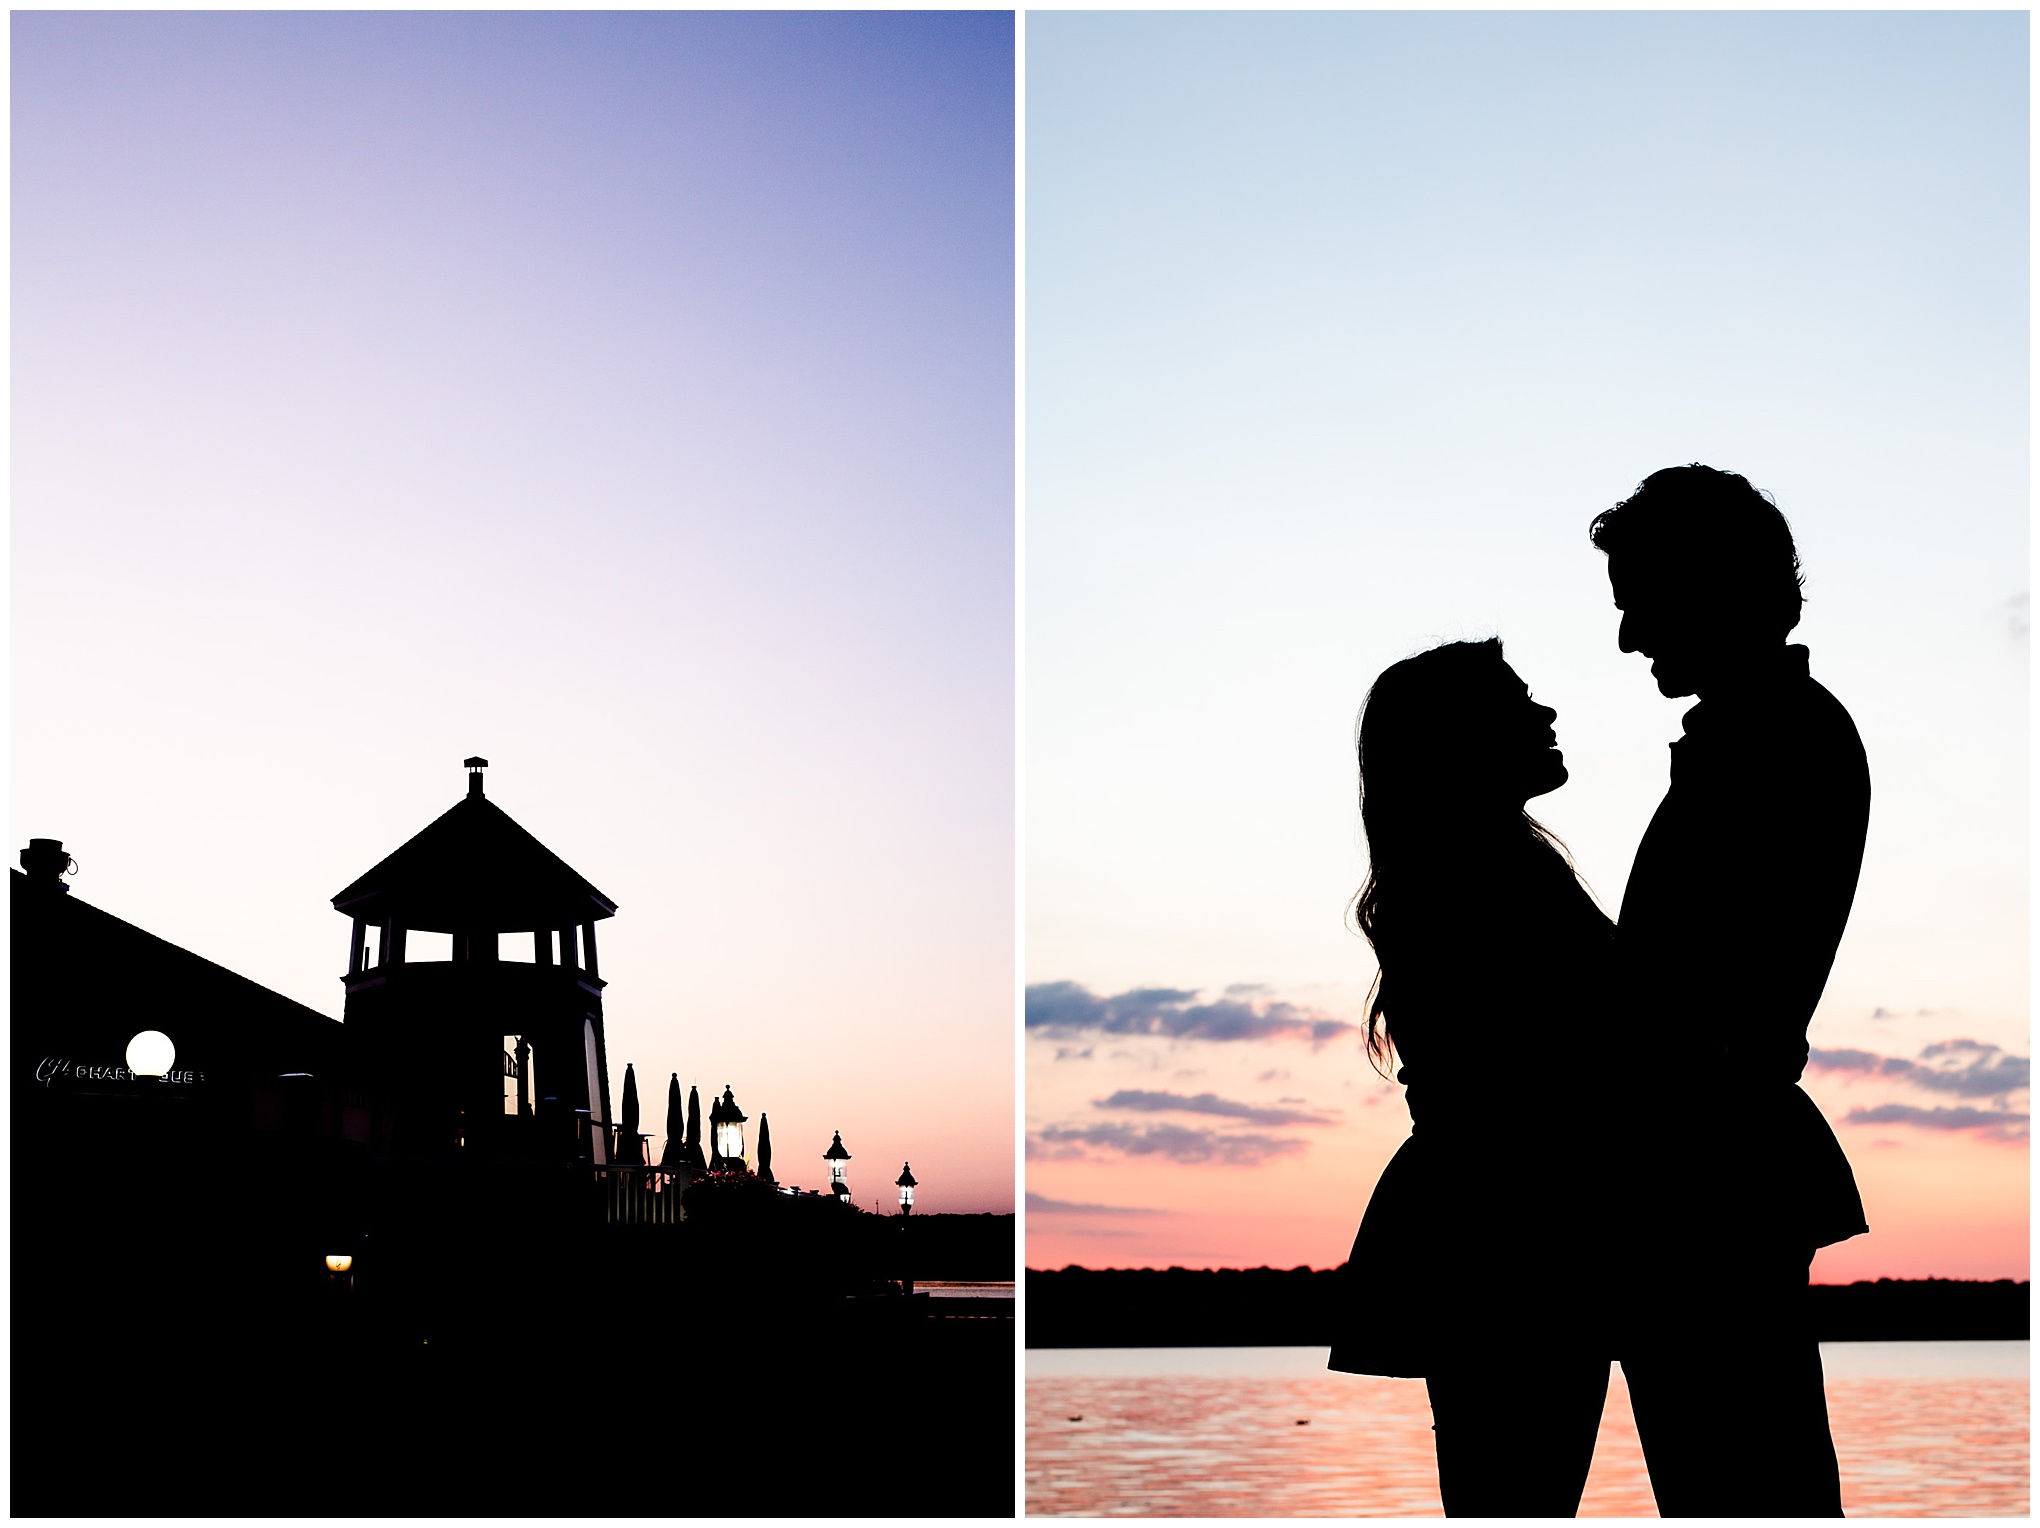 Old Town Alexandria engagement photos, Alexandria engagement photos, Old Town Alexandria photos, Old Town Alexandria, Alexandria engagement photos, Alexandria Virginia, classic engagement photos, historic town engagement photos, engagement photos, Rachel E.H. Photography, sunrise, silhouettes